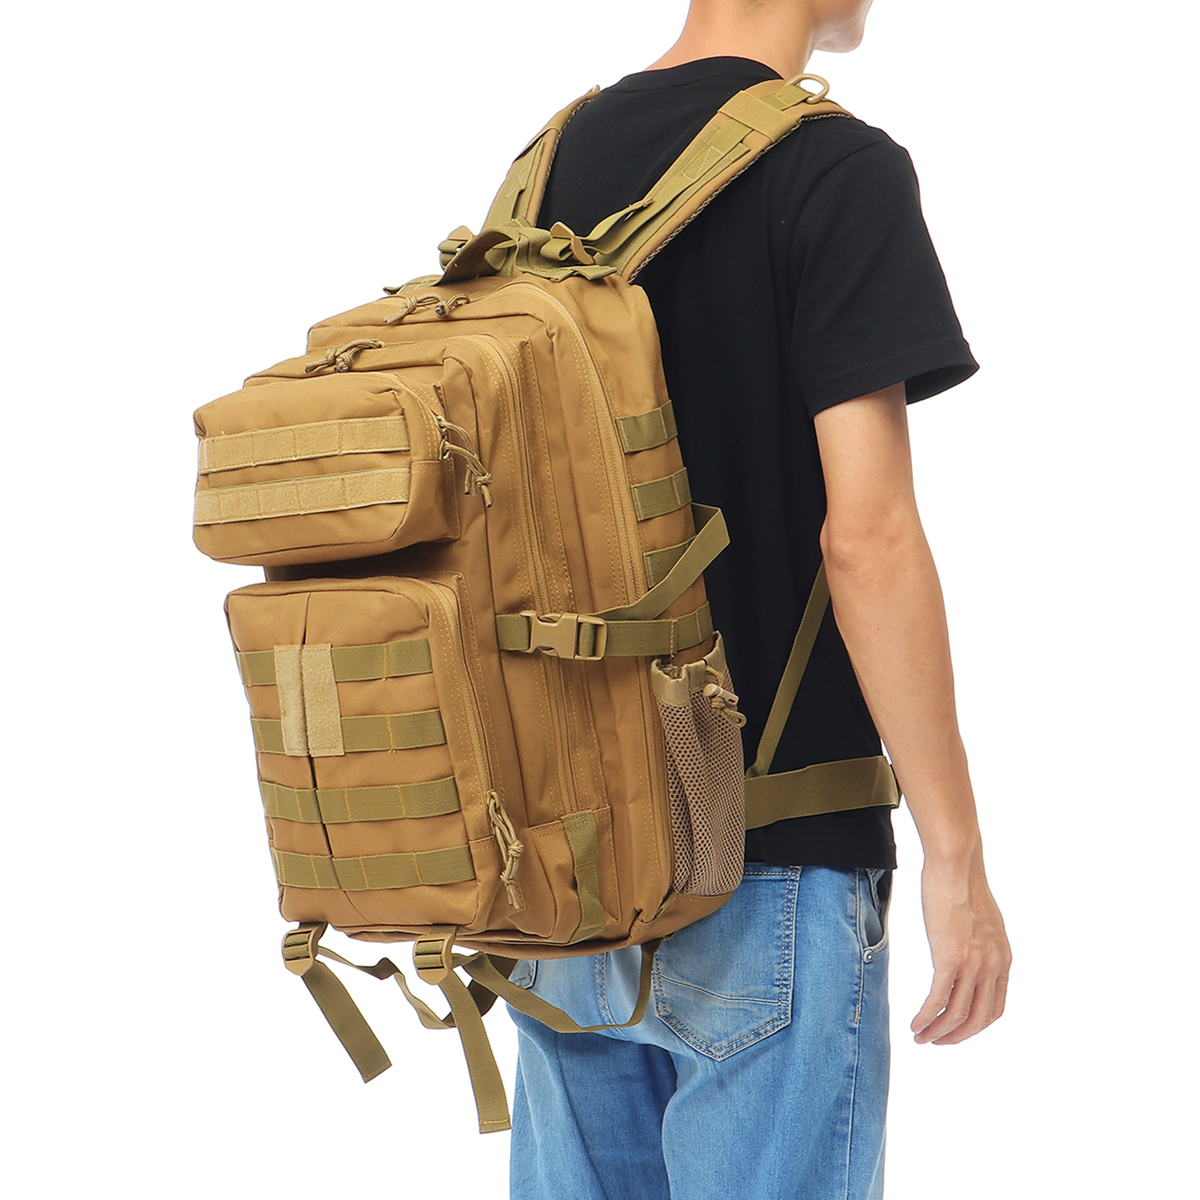 45L-900D-Waterproof-Tactical-Backpack-Oxford-Cloth-Molle-Military-Outdoor-Bag-Traveling-Camping-Hiki-1560781-7